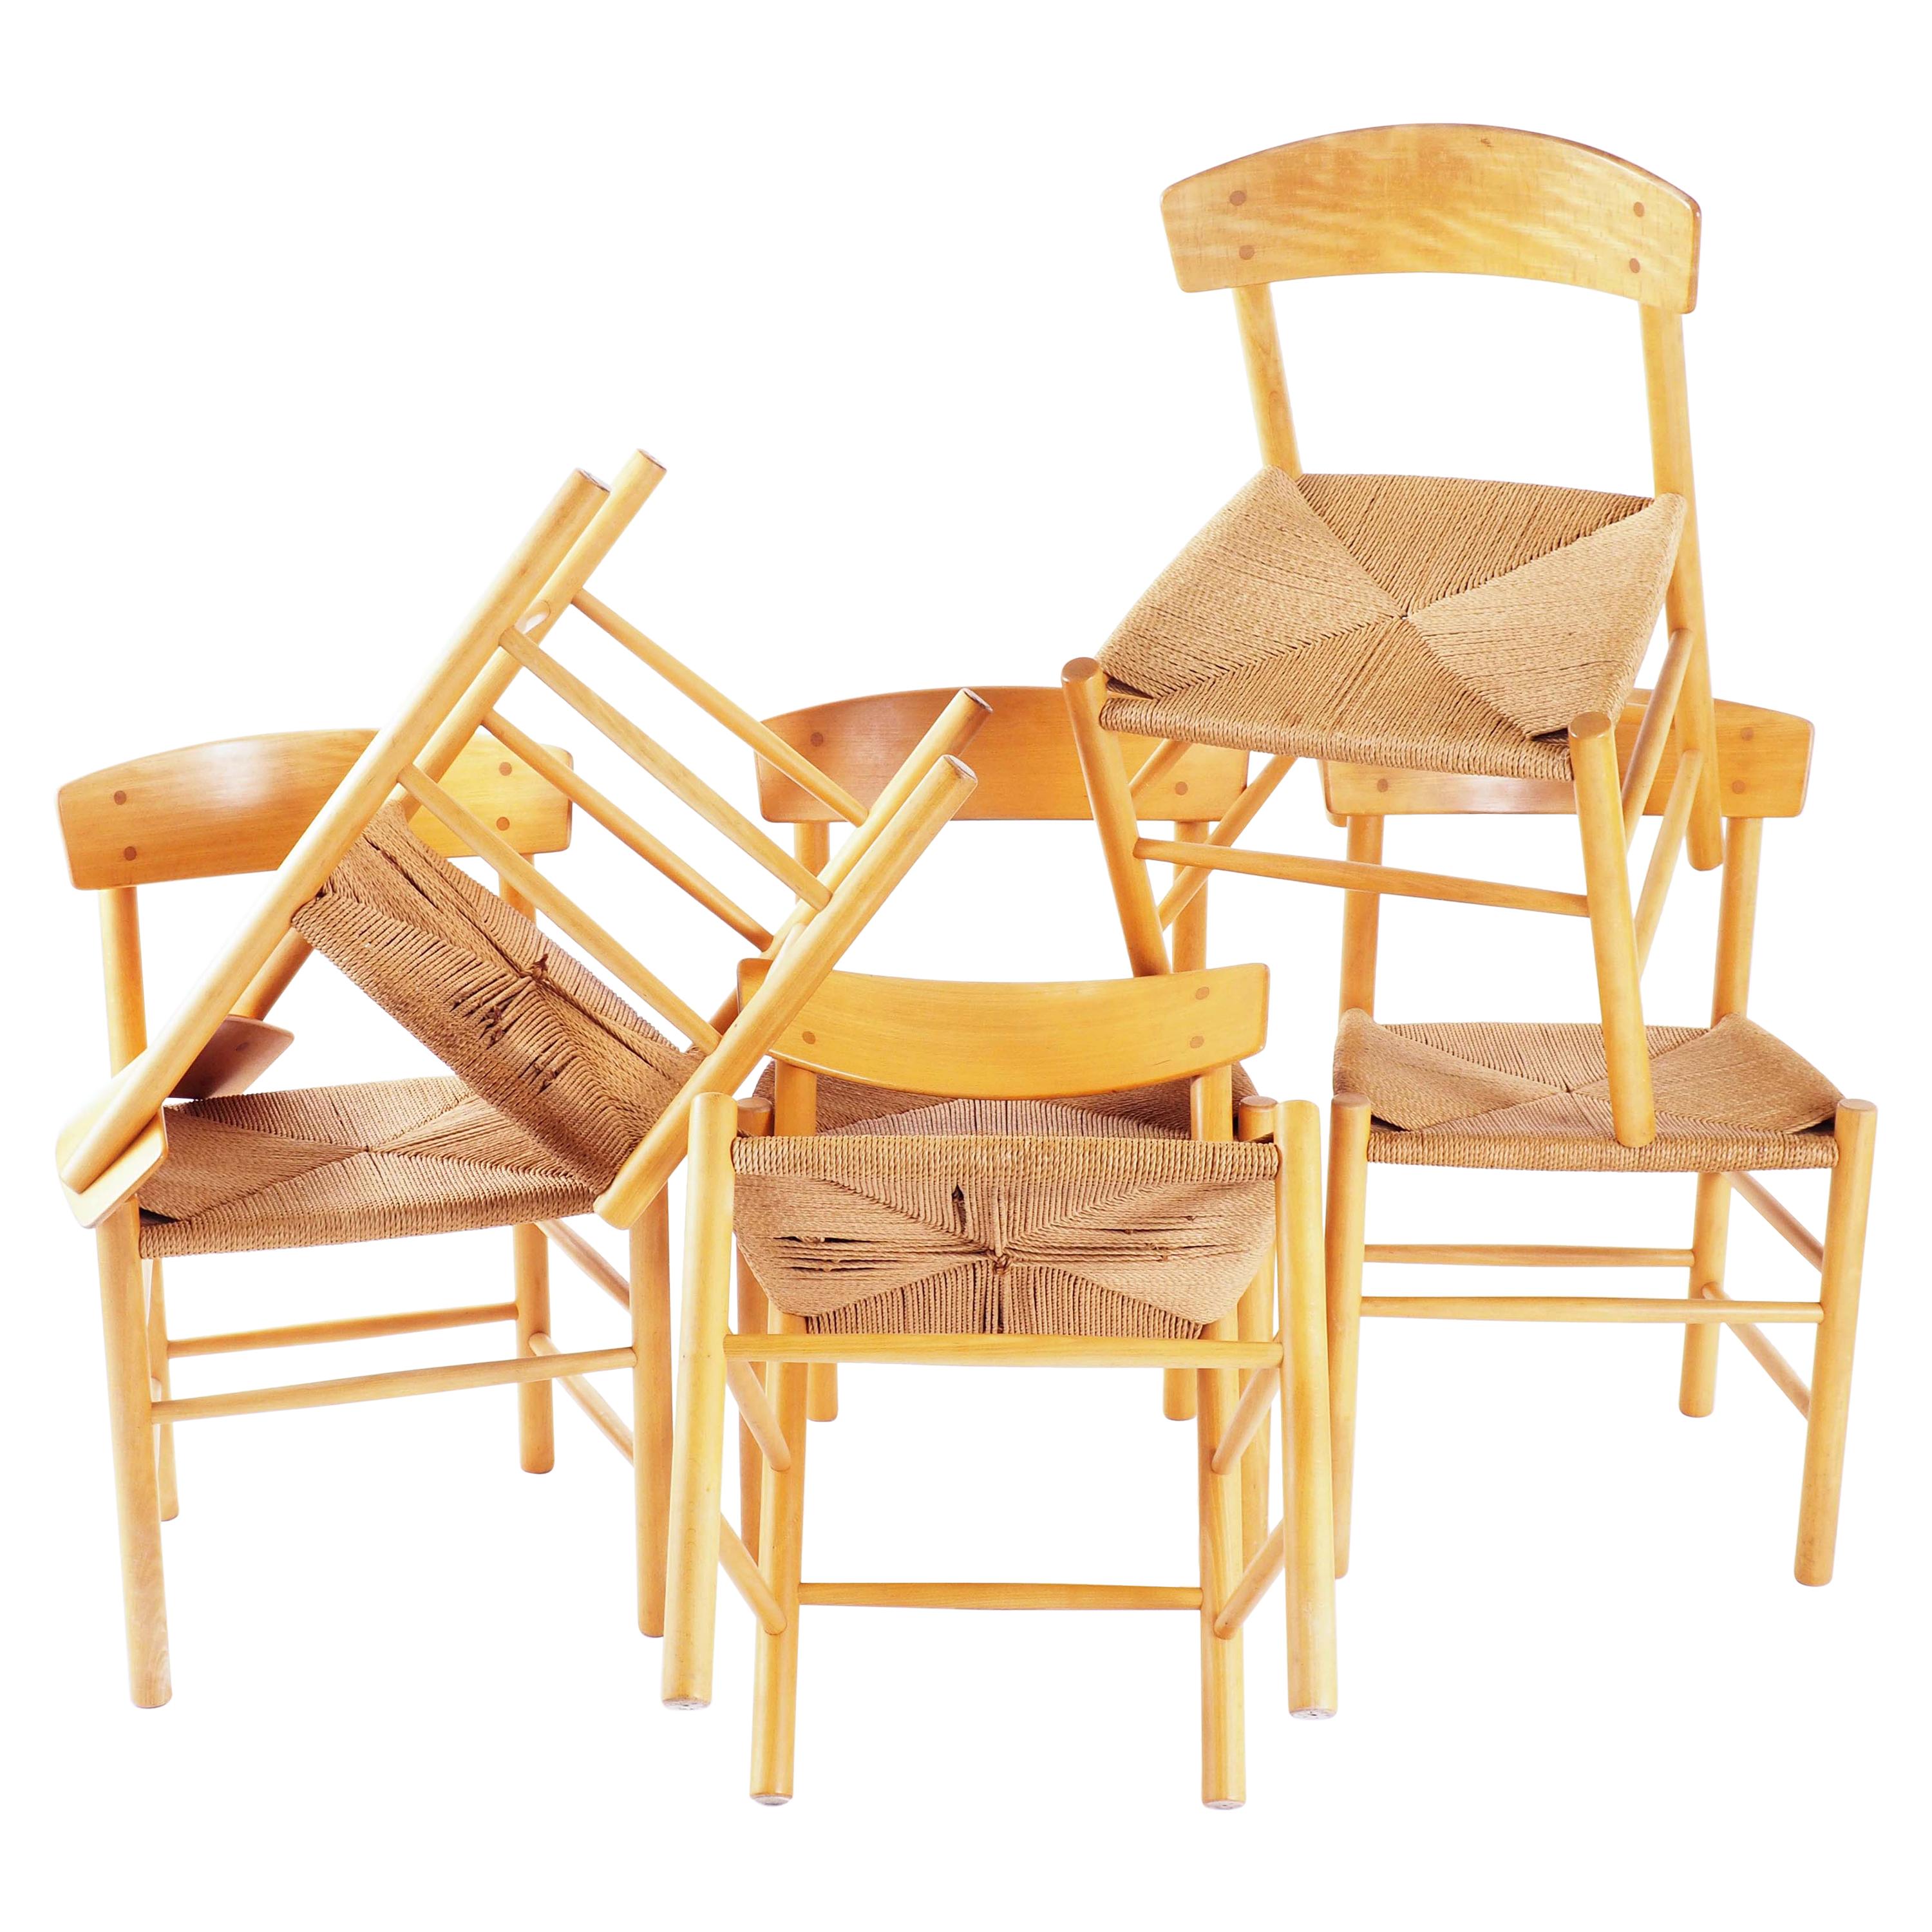 J39 chairs in beech and papercord by Børge Mogensen